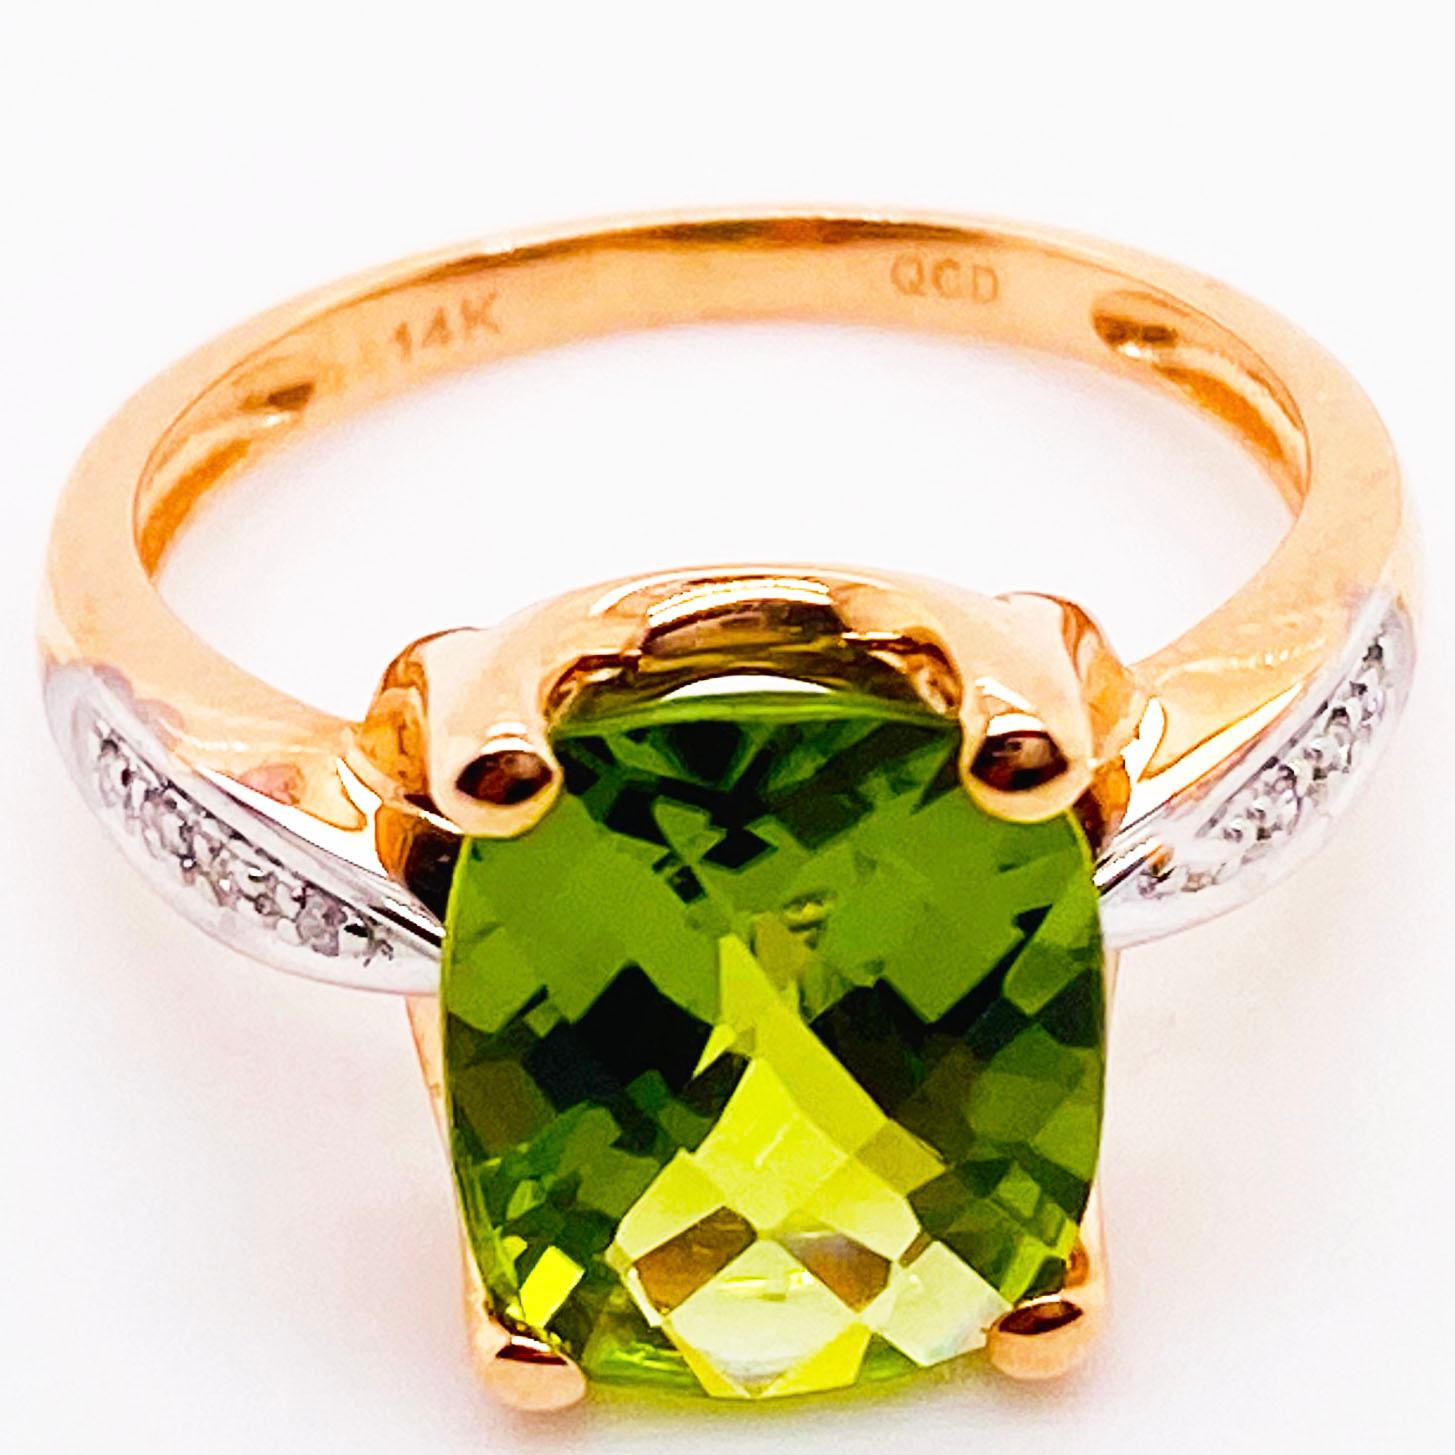 This striking perdiot and diamond ring has a gorgeous antique cushion cut is a beautifully hand cut gemstone with brilliance that showcases the perdiot's natural green colors. The antique cushion shape is an elongating shape that shows brilliance